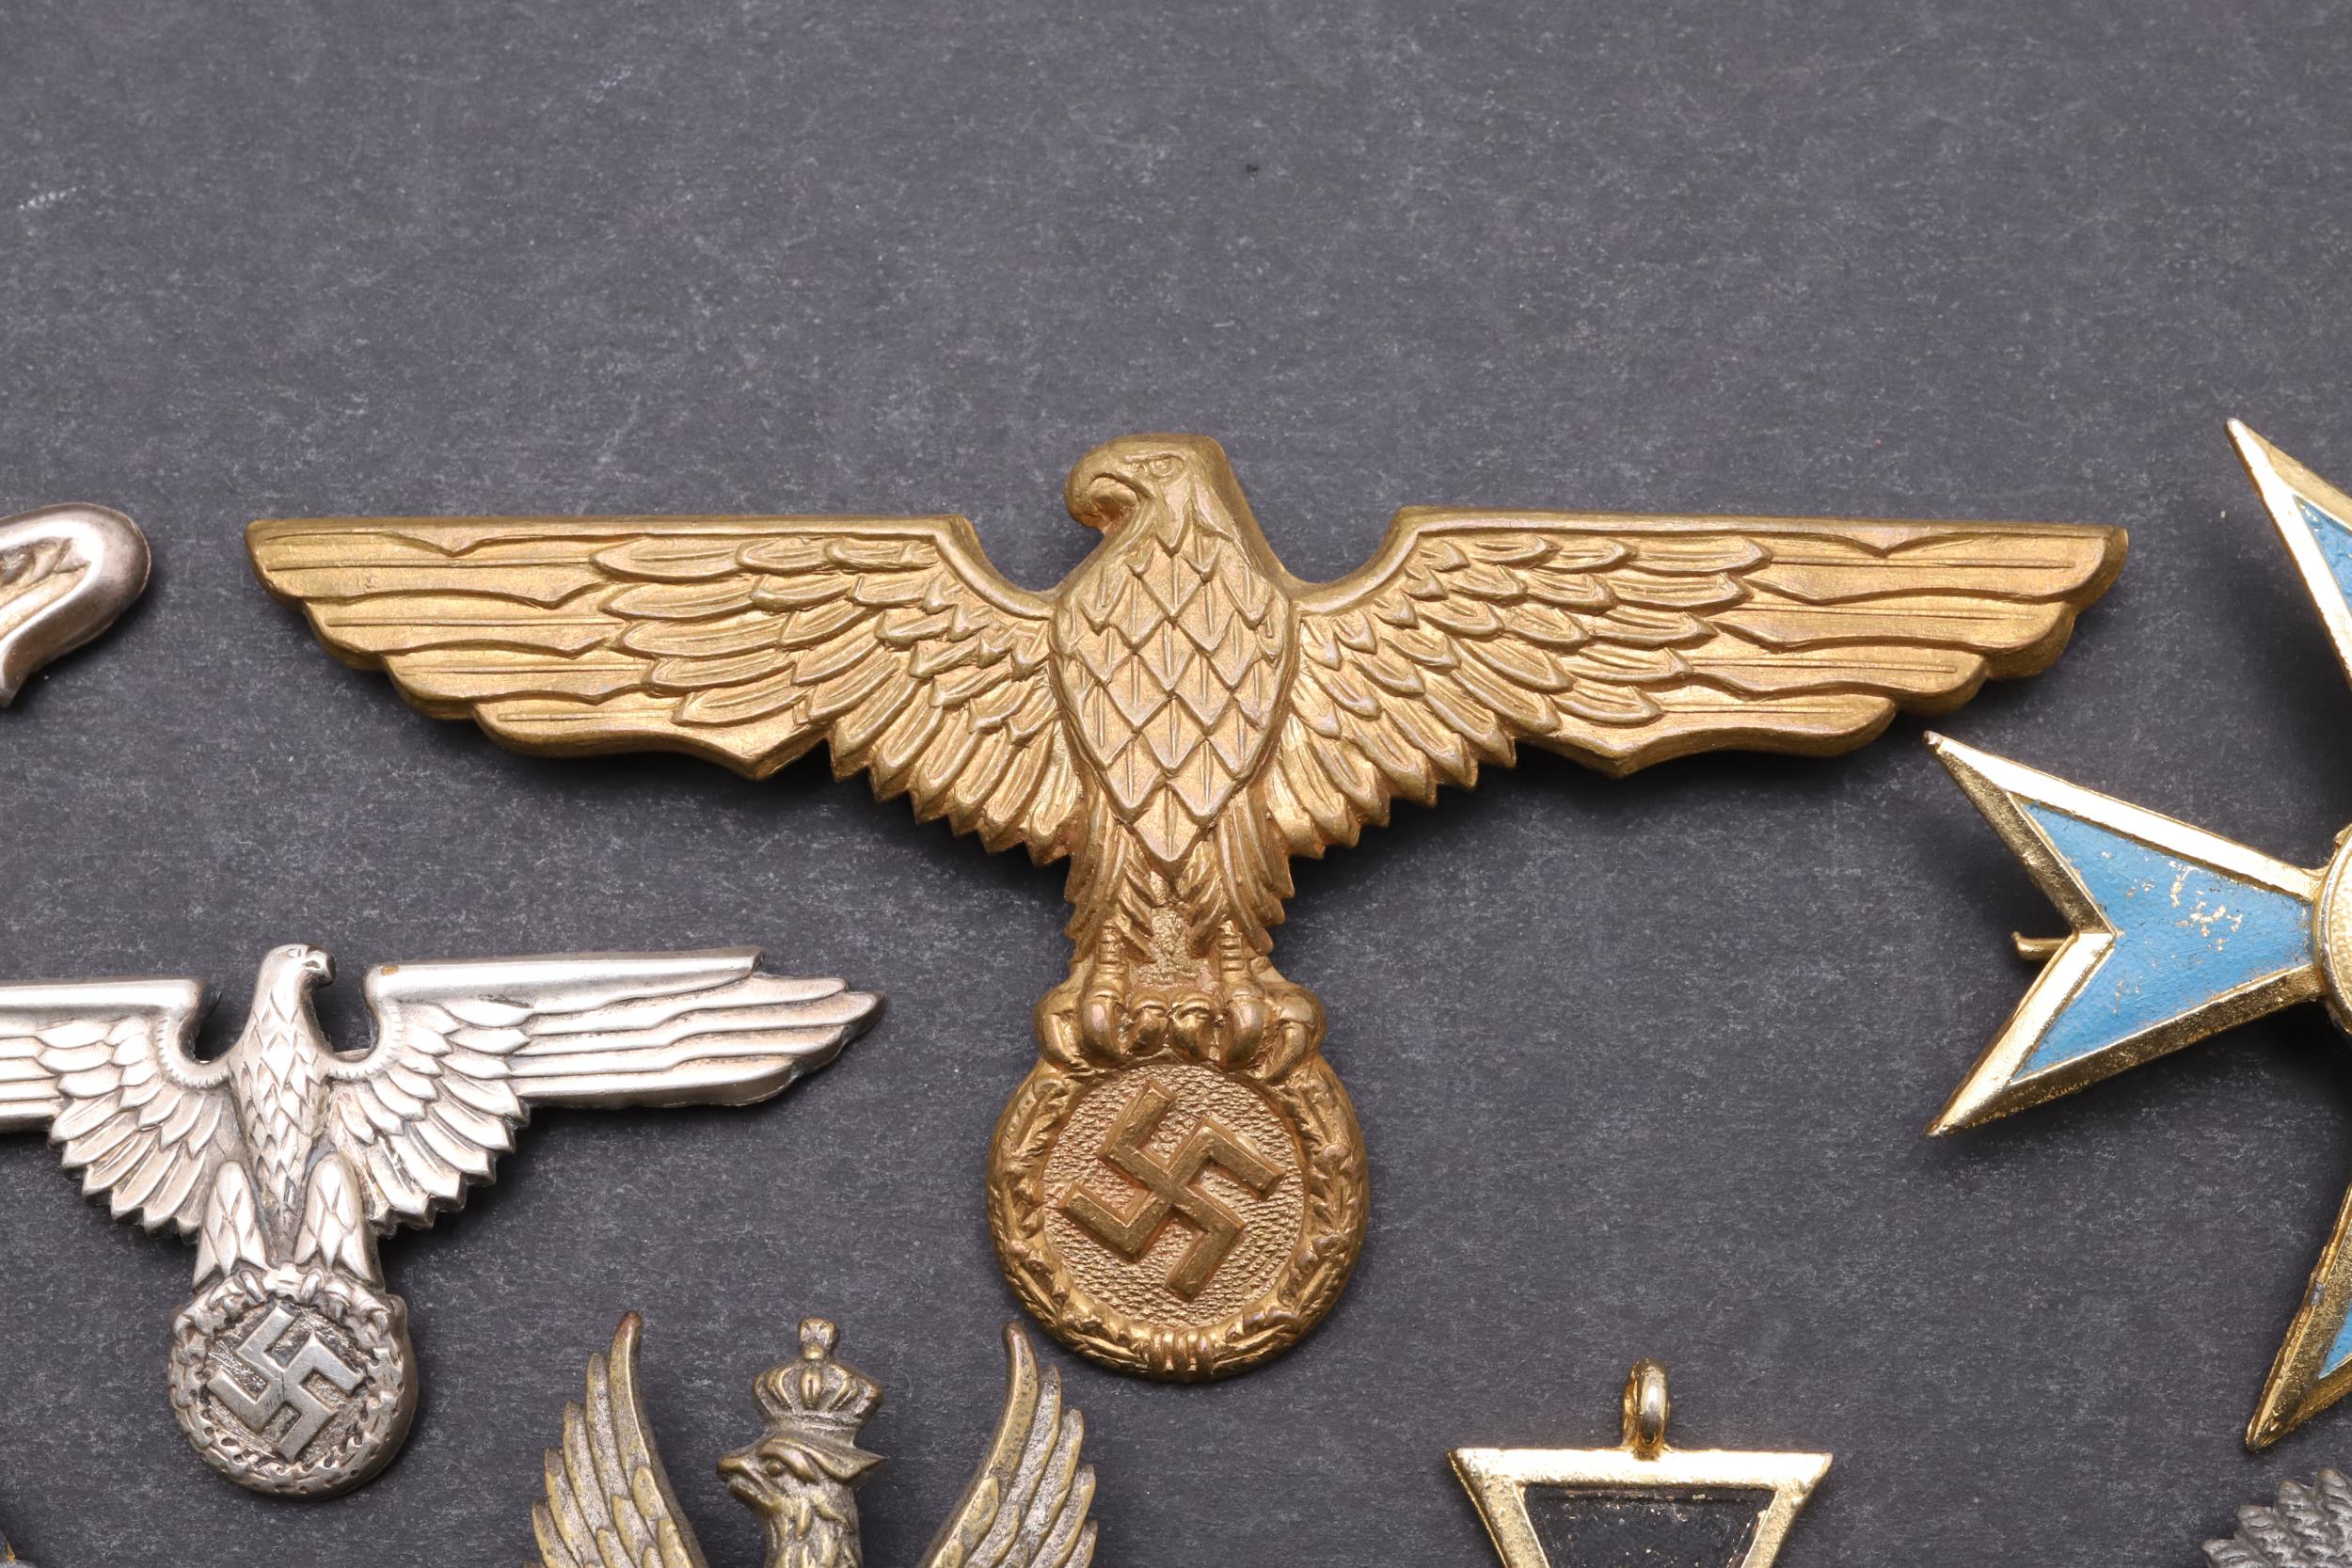 A SECOND WORLD WAR GERMAN MARKSMAN'S BADGE AND OTHERS SIMILAR. - Image 4 of 10